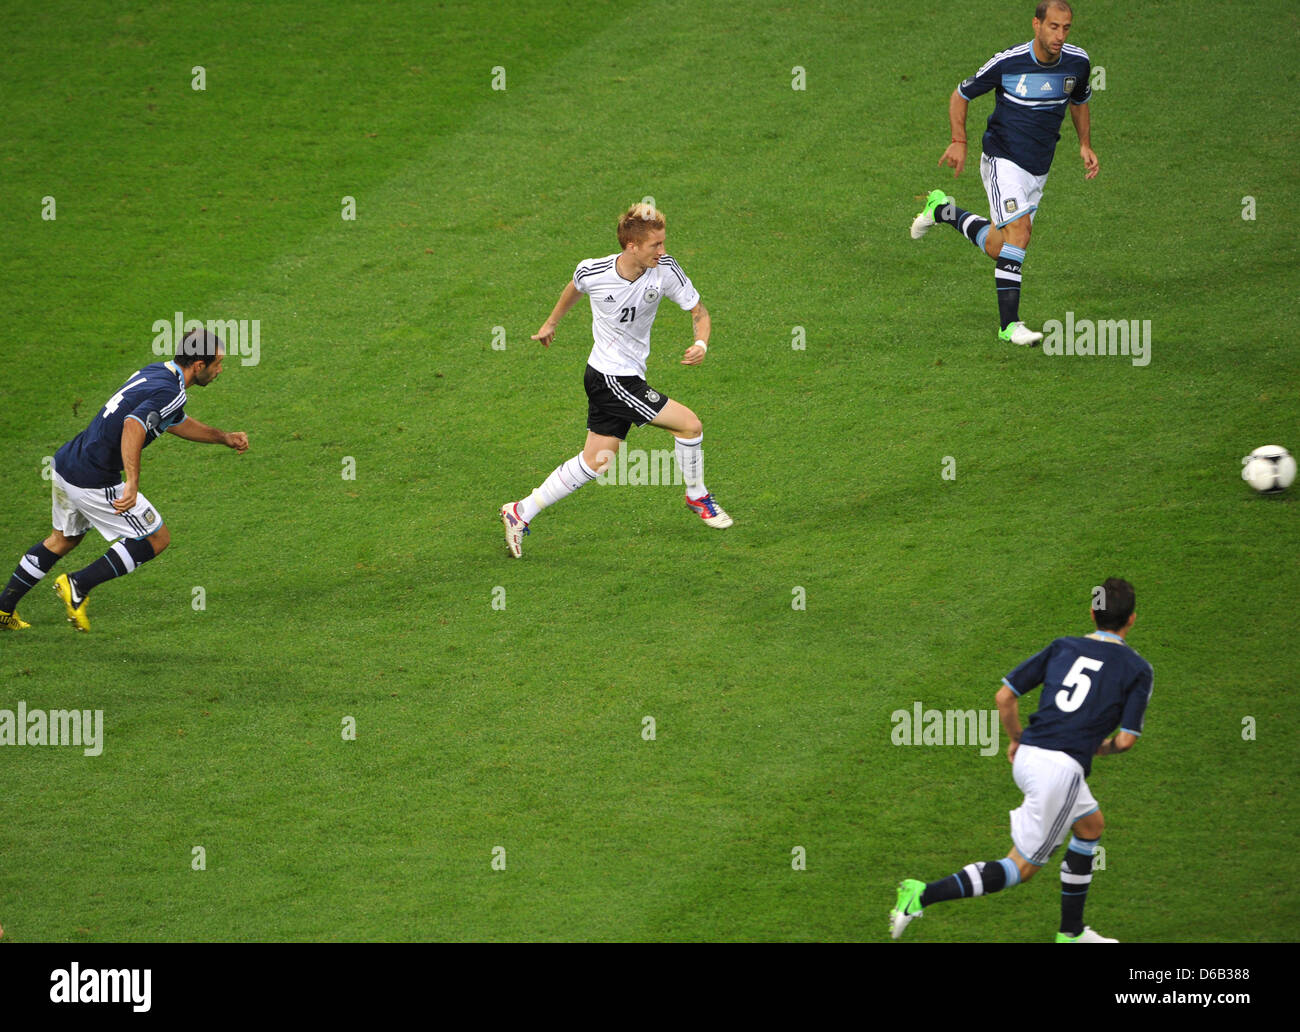 Germany's Marco Reus (M) plays the ball next to Argentina's Fernando Gago (R), Javier Mascherano (L) and Pablo Zabaleta during the friendly soccer match between Germany and Argentina at the Commerzbank-Arena in Frankfurt/Main, Germany, 15 August 2012. Photo: Frank Kleefeldt Stock Photo